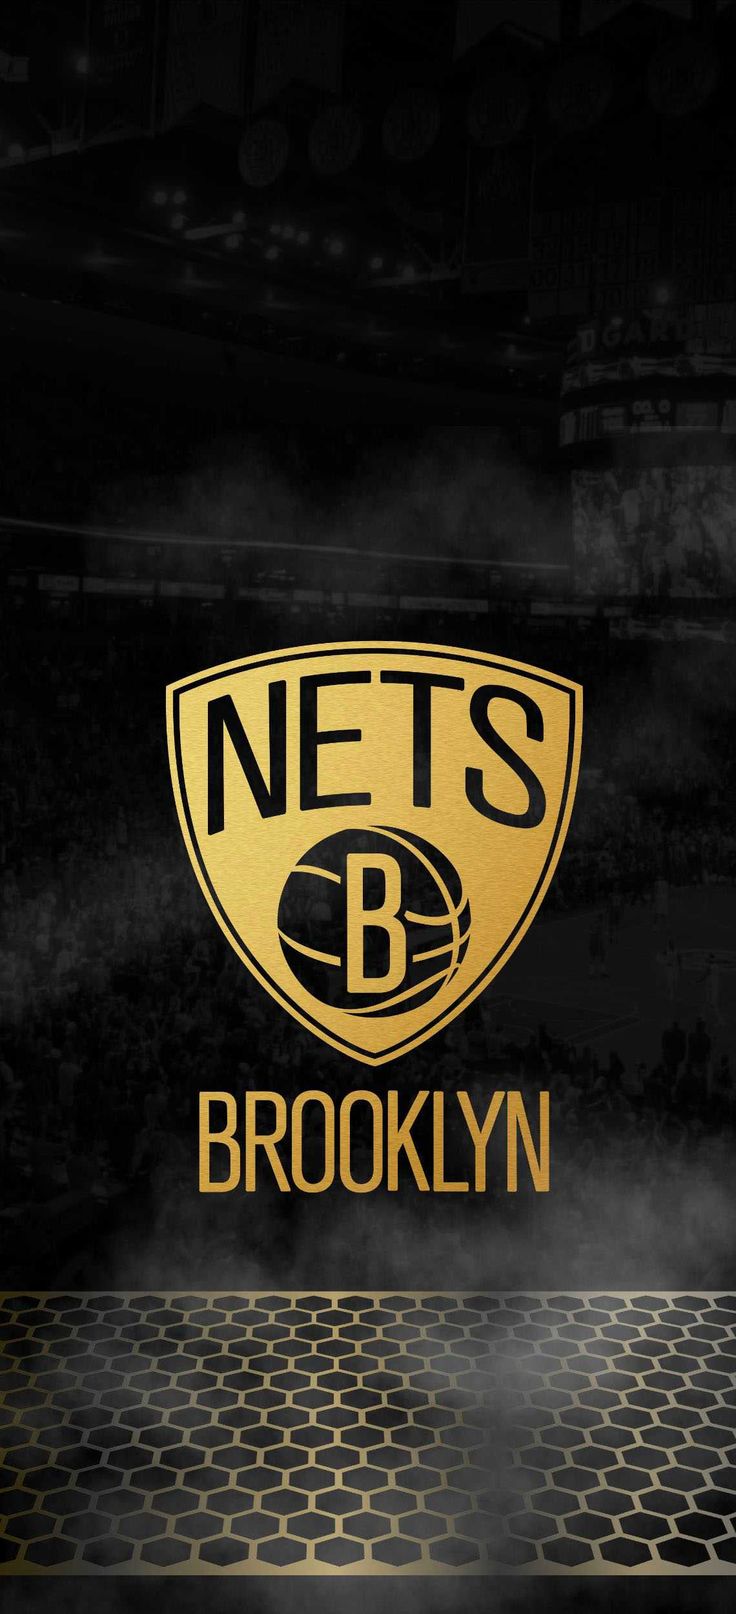 Brooklyn Nets Wallpaper Browse Brooklyn Nets Wallpaper with collections of Android, Basketball, Bro. Brooklyn nets, Basketball wallpaper, Brooklyn nets basketball